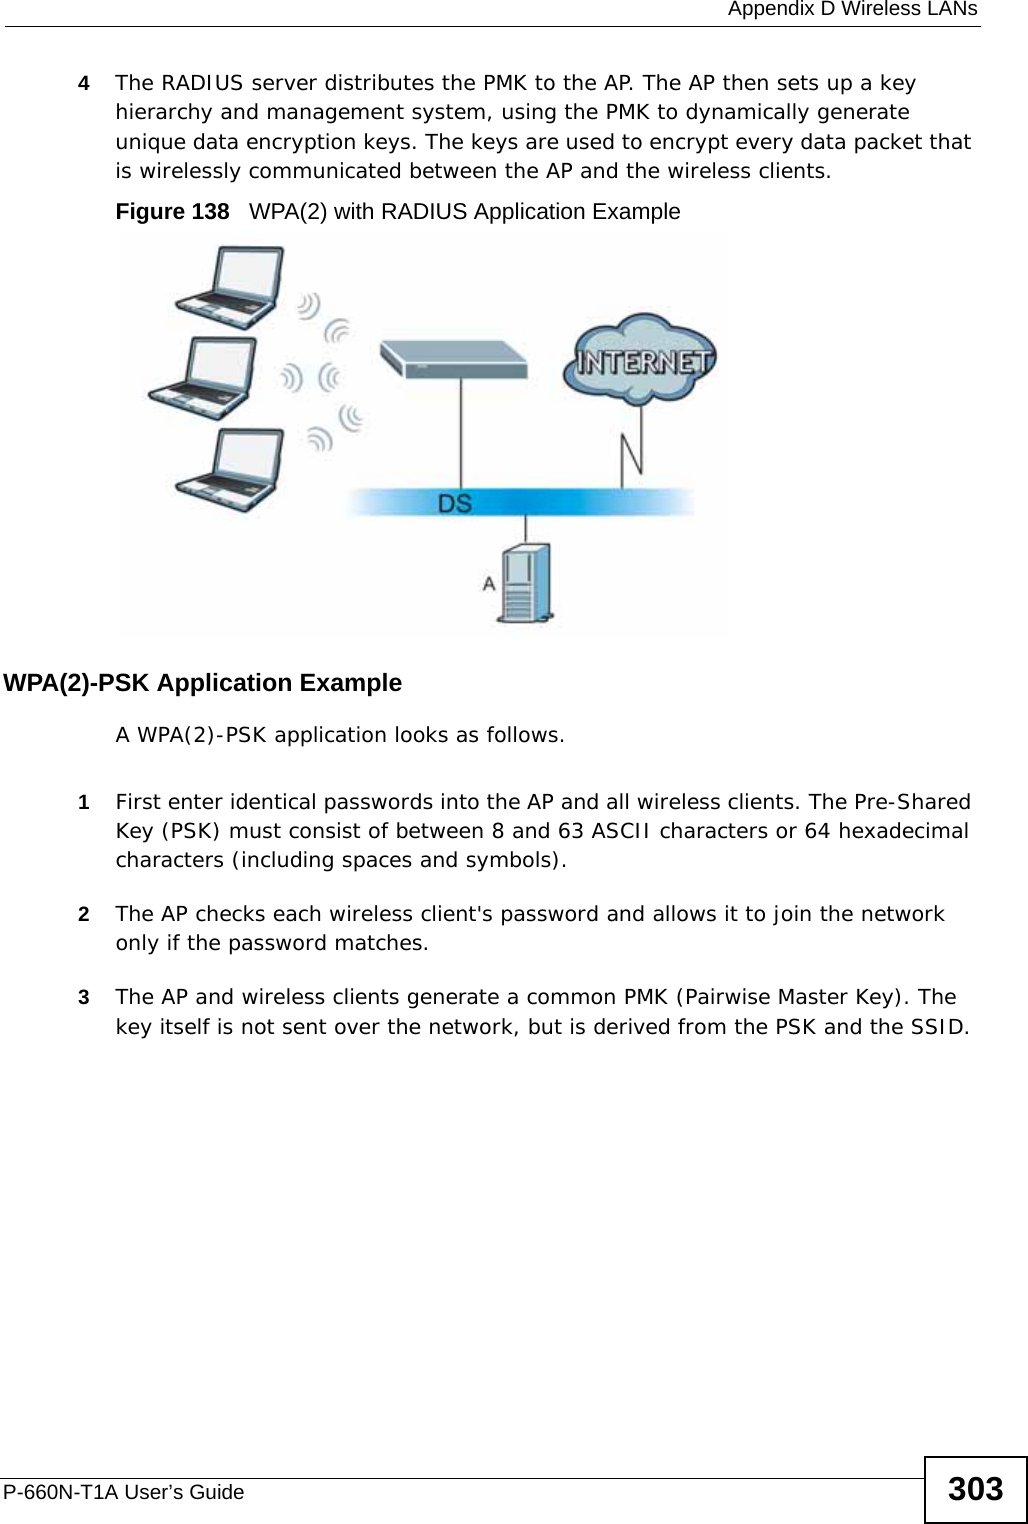  Appendix D Wireless LANsP-660N-T1A User’s Guide 3034The RADIUS server distributes the PMK to the AP. The AP then sets up a key hierarchy and management system, using the PMK to dynamically generate unique data encryption keys. The keys are used to encrypt every data packet that is wirelessly communicated between the AP and the wireless clients.Figure 138   WPA(2) with RADIUS Application ExampleWPA(2)-PSK Application ExampleA WPA(2)-PSK application looks as follows.1First enter identical passwords into the AP and all wireless clients. The Pre-Shared Key (PSK) must consist of between 8 and 63 ASCII characters or 64 hexadecimal characters (including spaces and symbols).2The AP checks each wireless client&apos;s password and allows it to join the network only if the password matches.3The AP and wireless clients generate a common PMK (Pairwise Master Key). The key itself is not sent over the network, but is derived from the PSK and the SSID. 